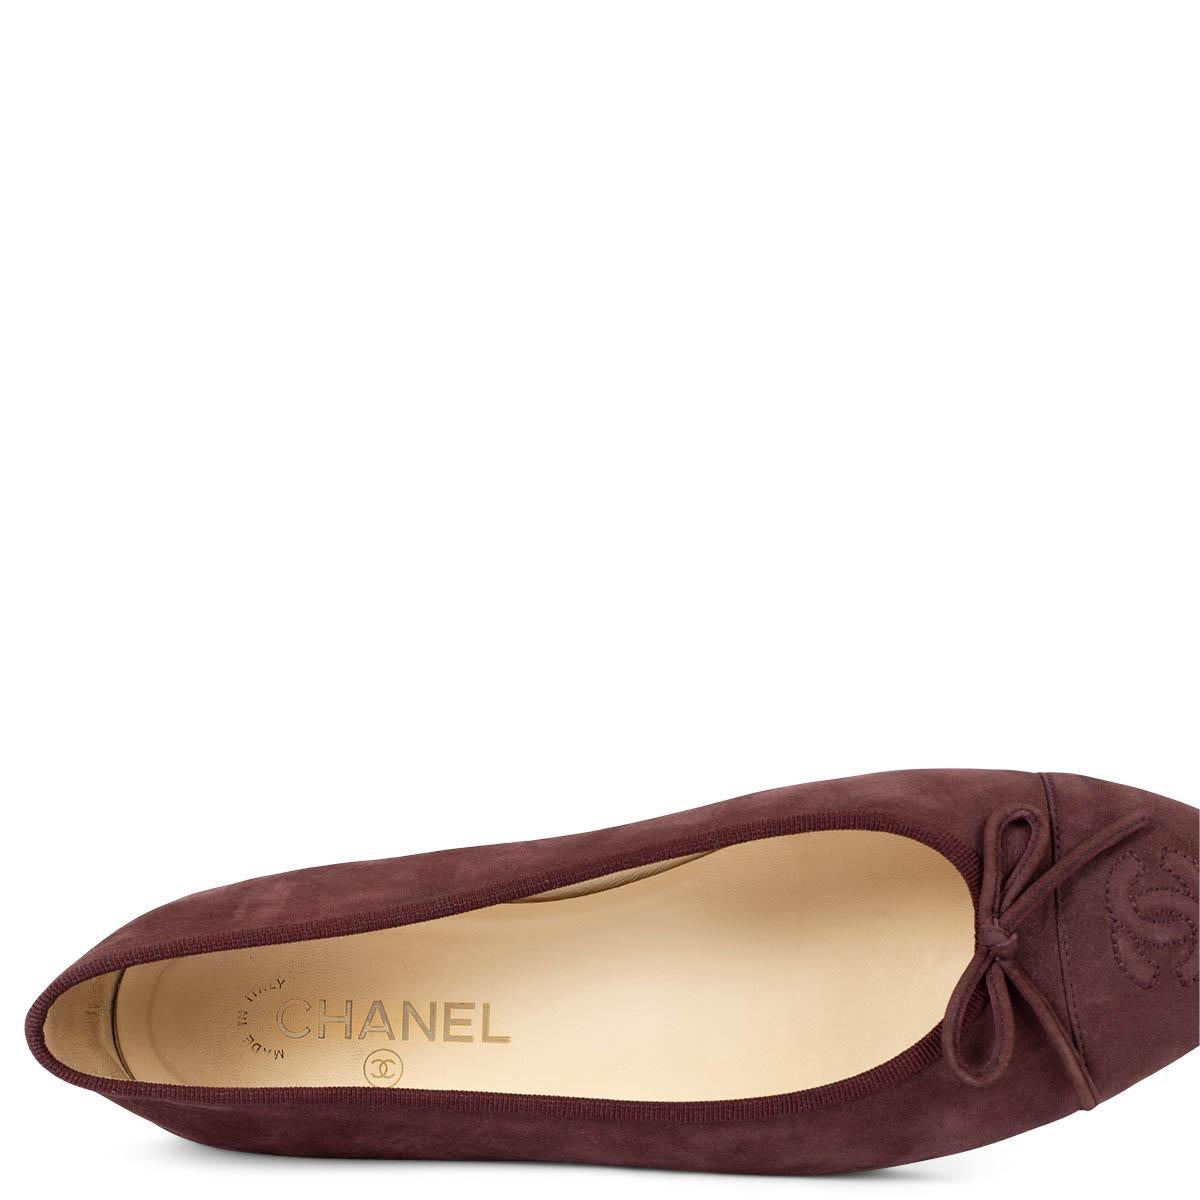 CHANEL burgundy suede CLASSIC Ballet Flats Shoes 39.5 fit 39 For Sale 4